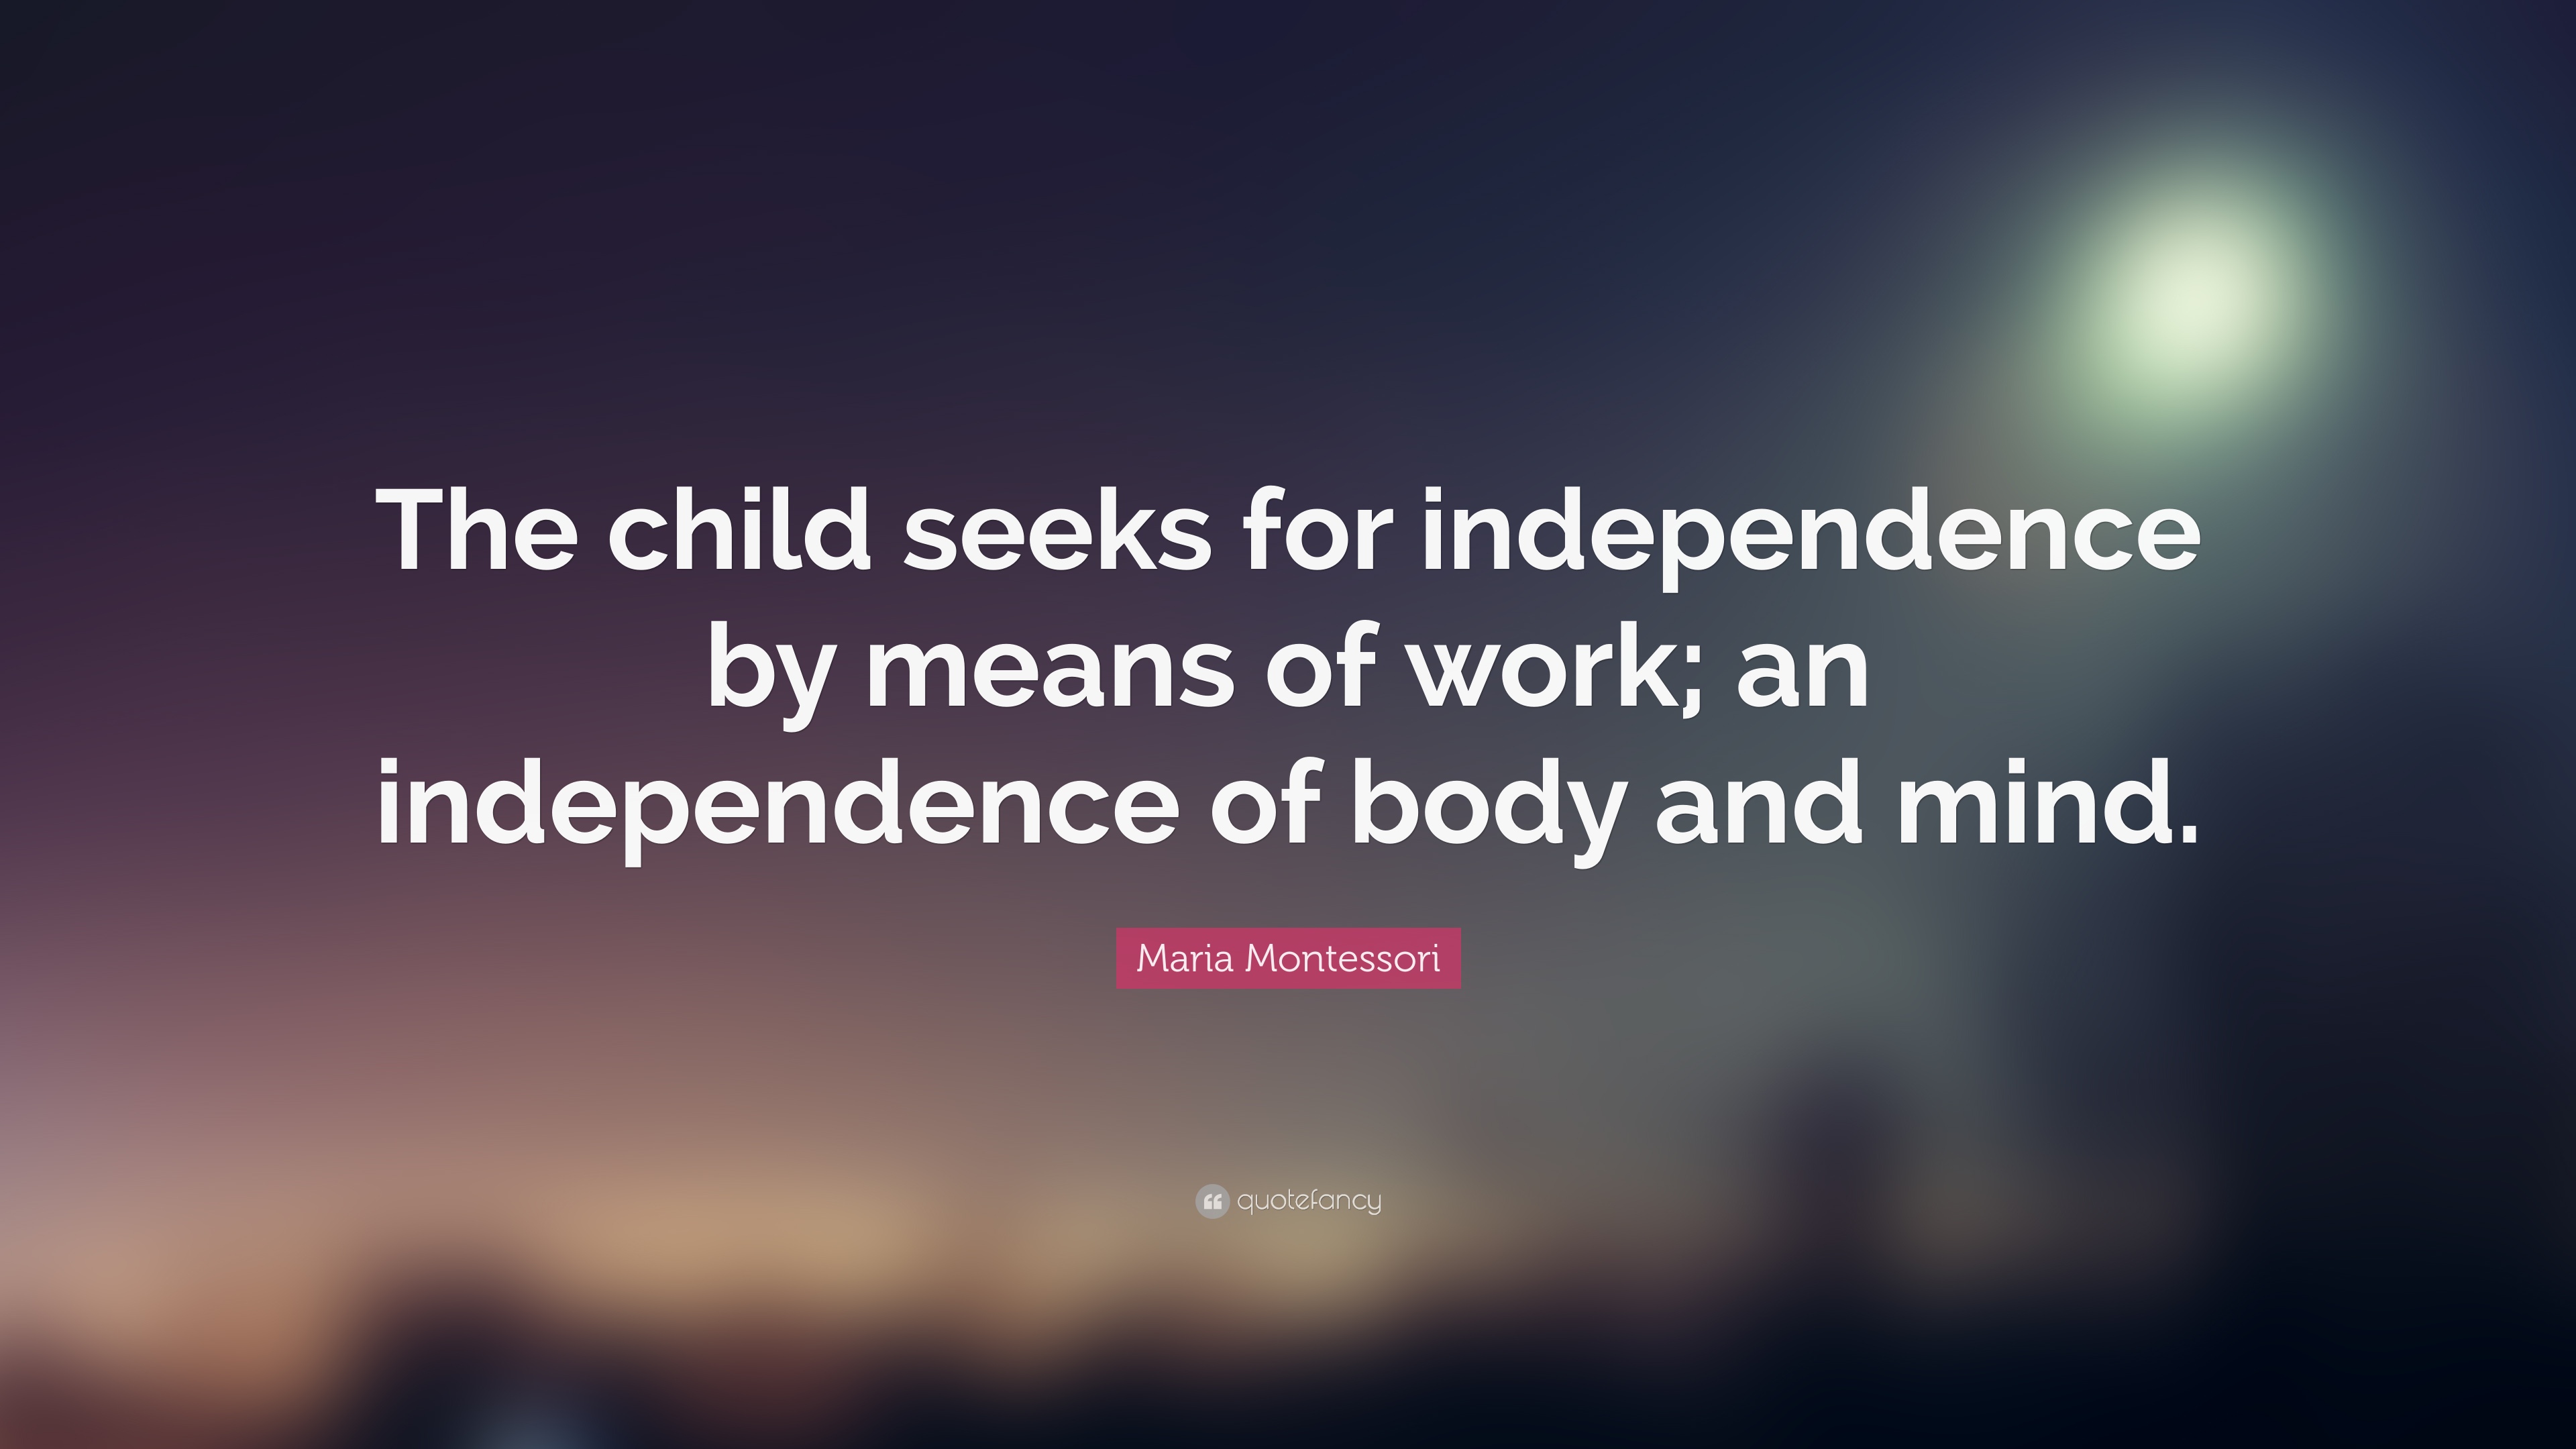 106 Inspiring Quotes And Sayings About Independence And Freedom